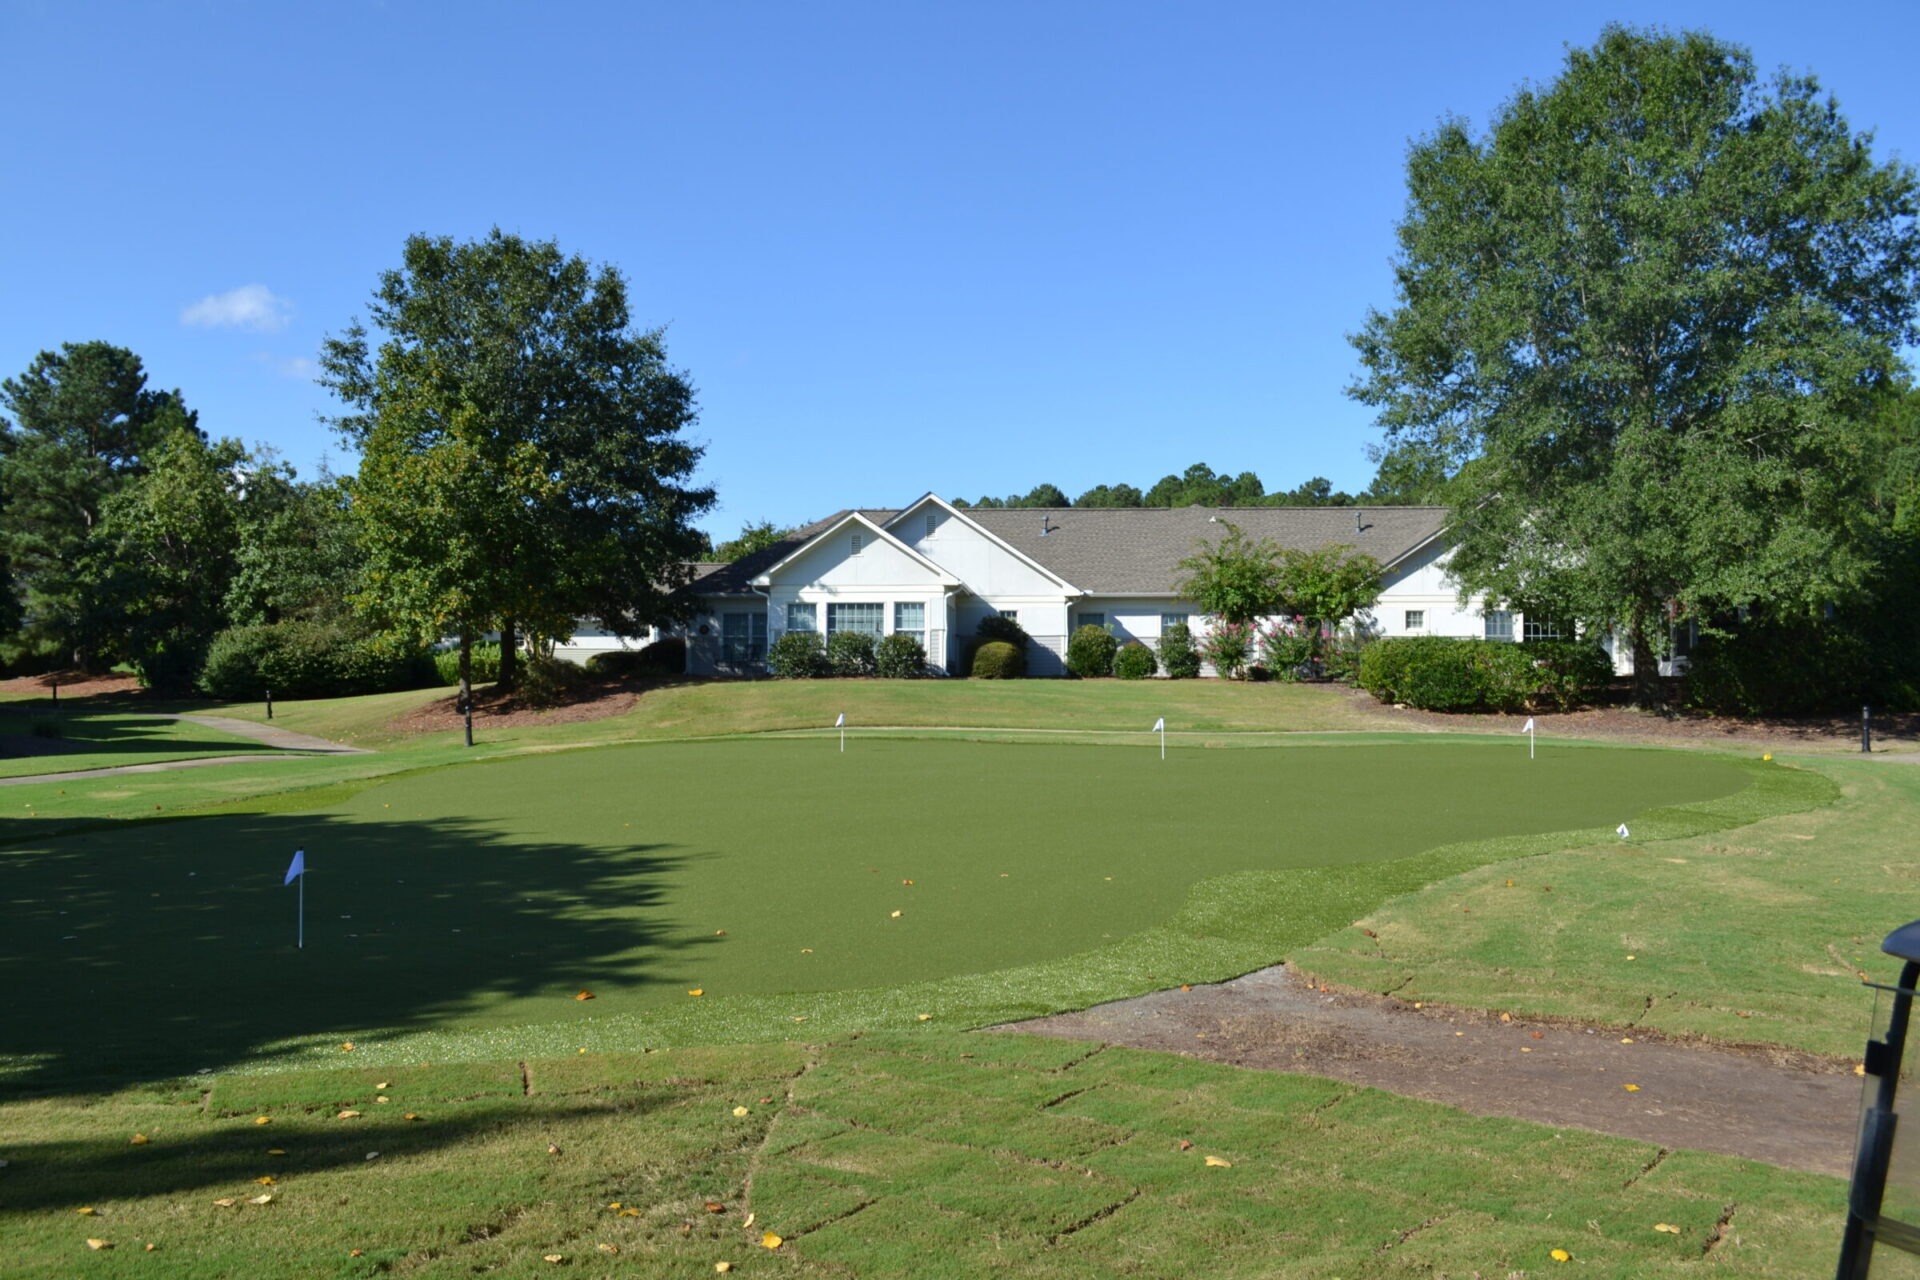 A well-manicured golf putting green with multiple holes, next to a single-story residential house, surrounded by trees under a clear blue sky.